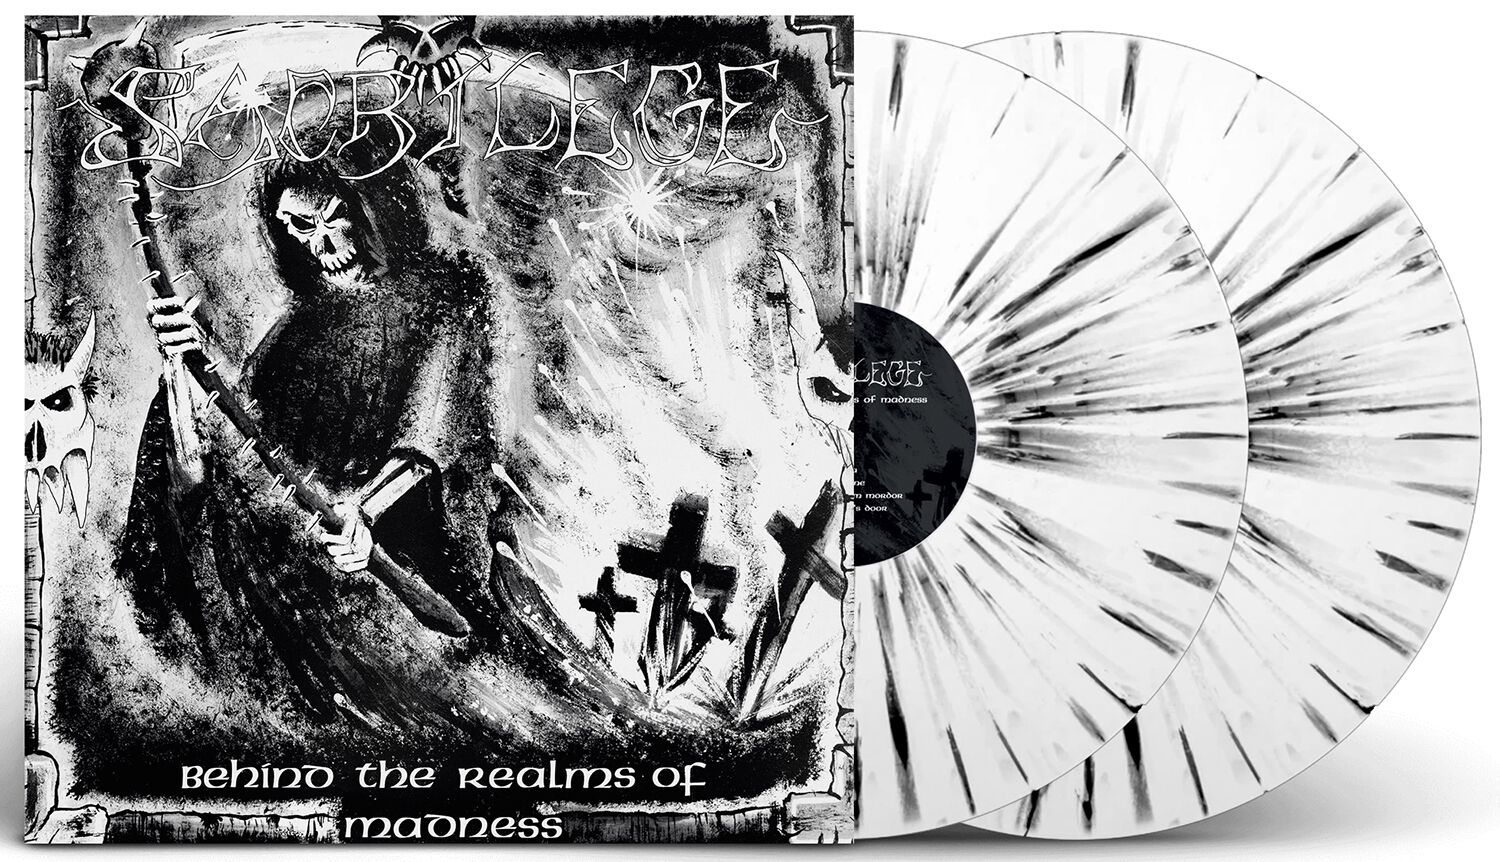 Sacrilege Behind the realms of madness LP splattered